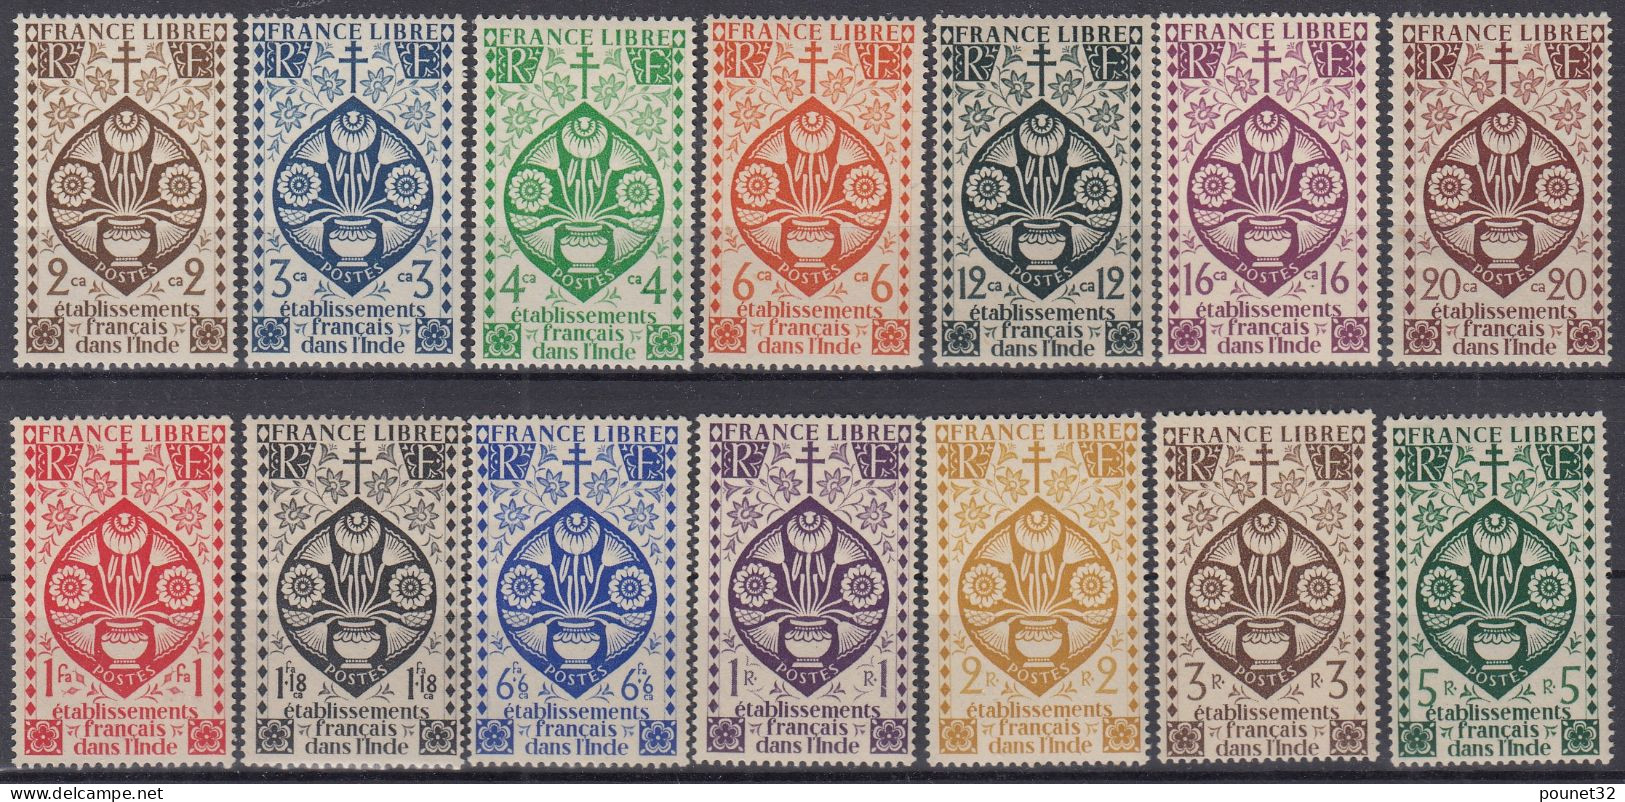 TIMBRE INDE SERIE COMPLETE N° 217/230 NEUFS * GOMME LEGERE TRACE DE CHARNIERE - Nuevos